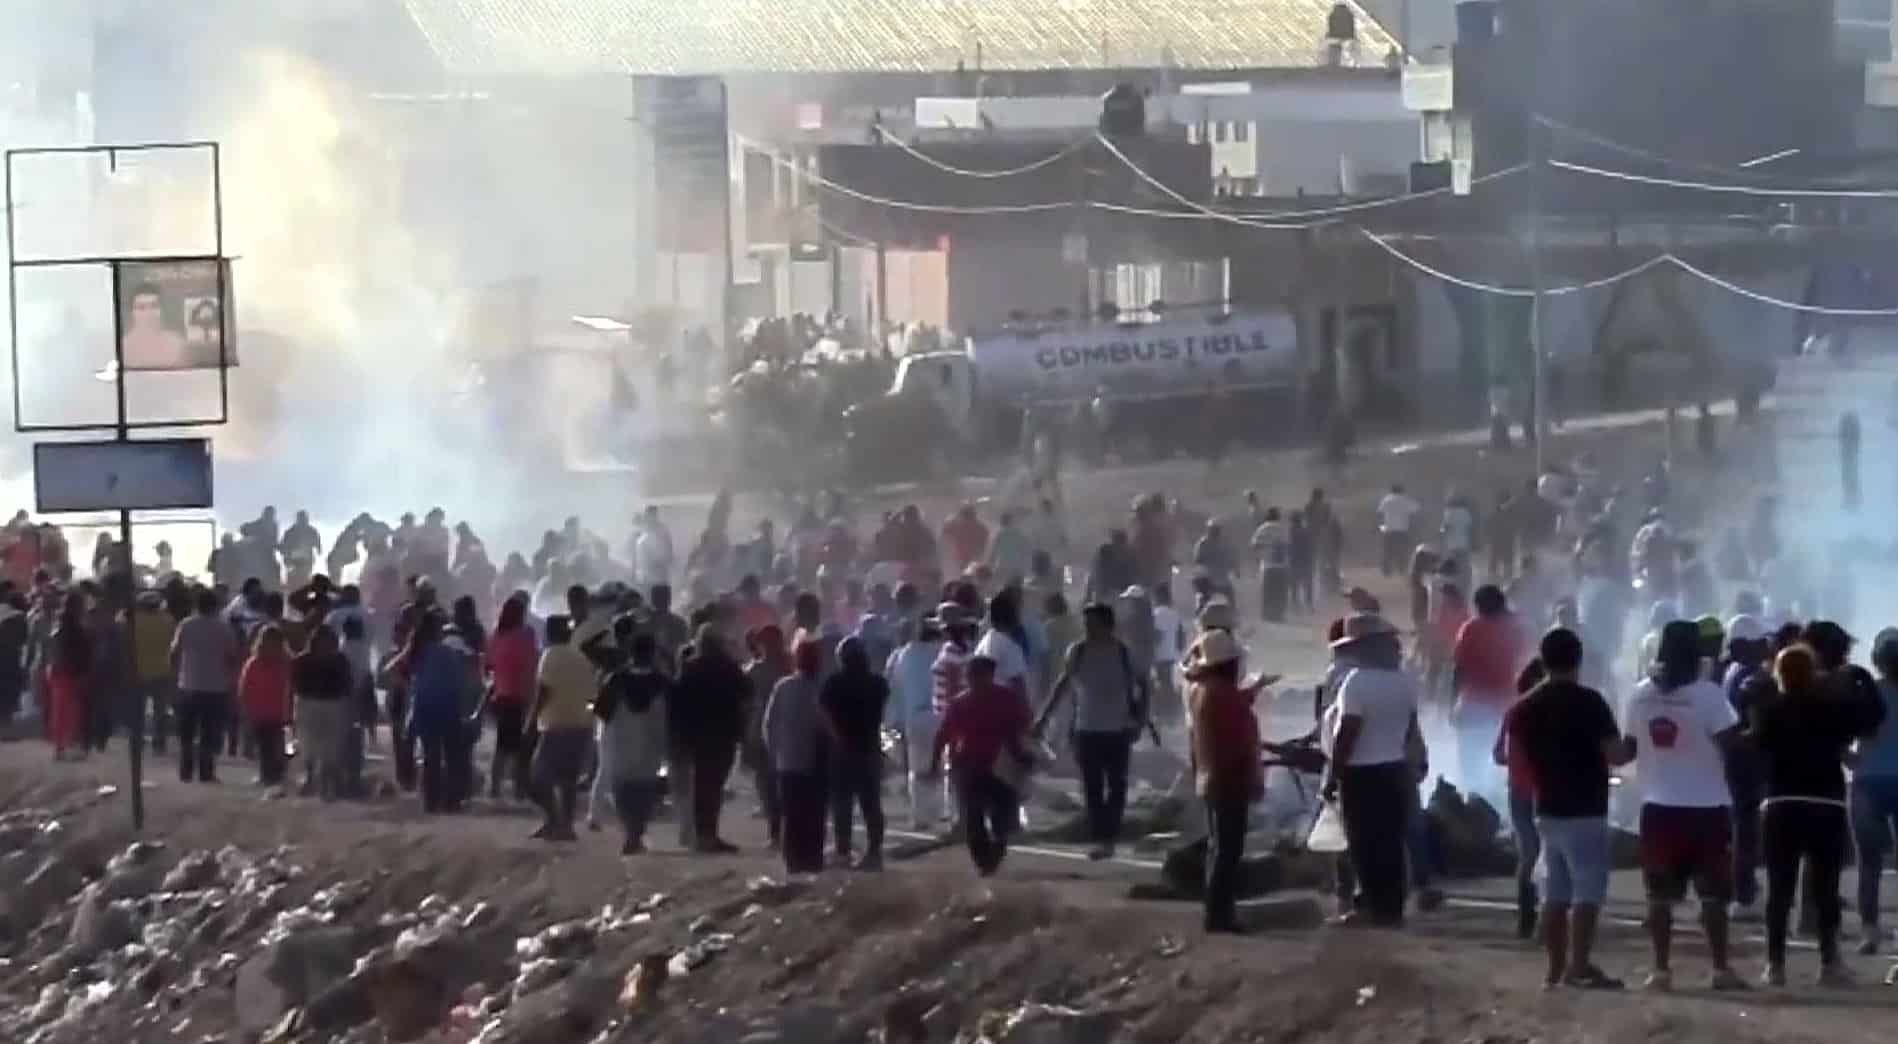 Violent clashes between police and demonstrators in the Peruvian city of Mollendo, about 1,000 km south of Lima, on May 6, 2015. Three people have been killed in clashes between police and demonstrators during seven weeks of protests against the $1.4 billion Tía María mine.